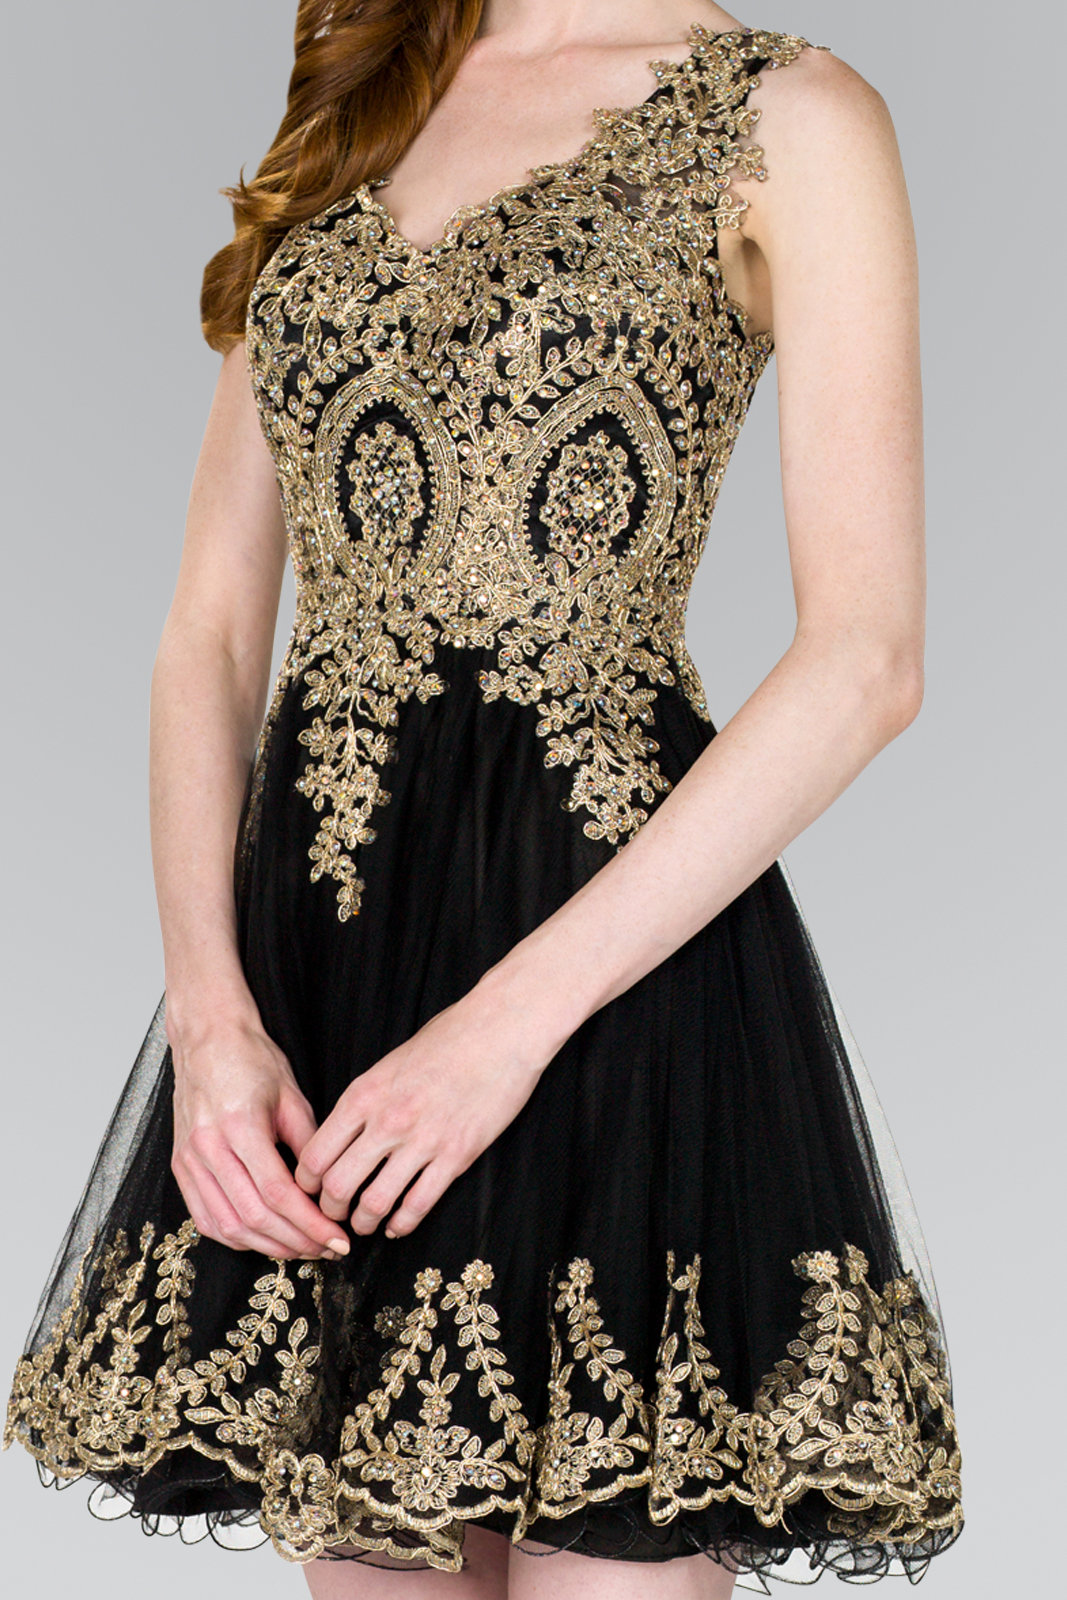 Black Homecoming Dress with Gold Embroidery